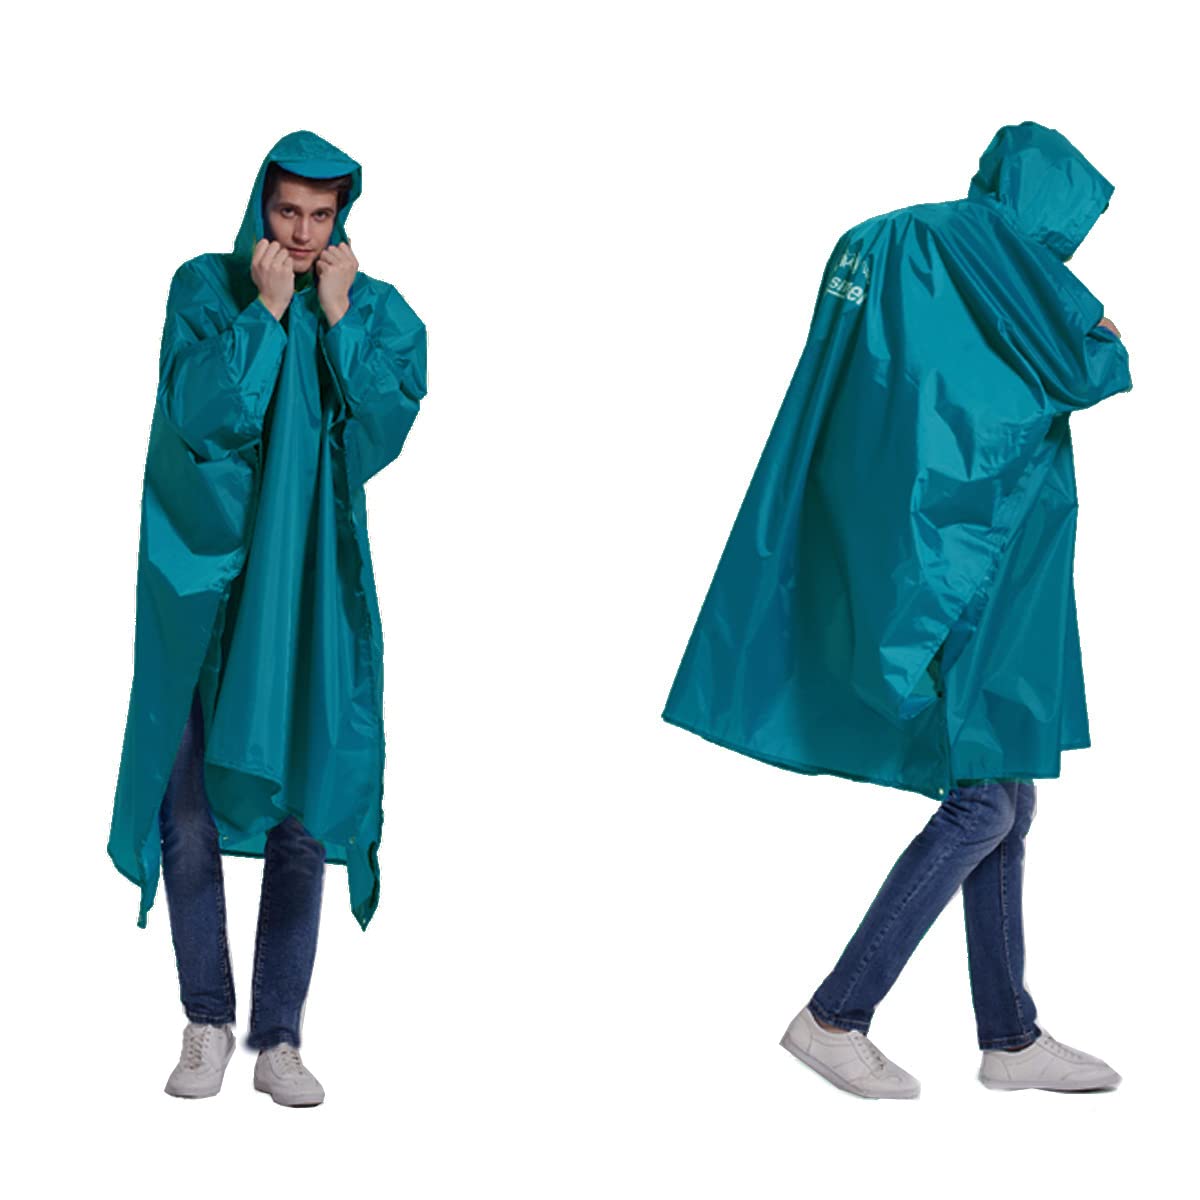 longsinger Rain Ponchos for Adults, Waterproof Rain Poncho with Hood and Arms for Hiking, Hunting, Outdoor, Blue